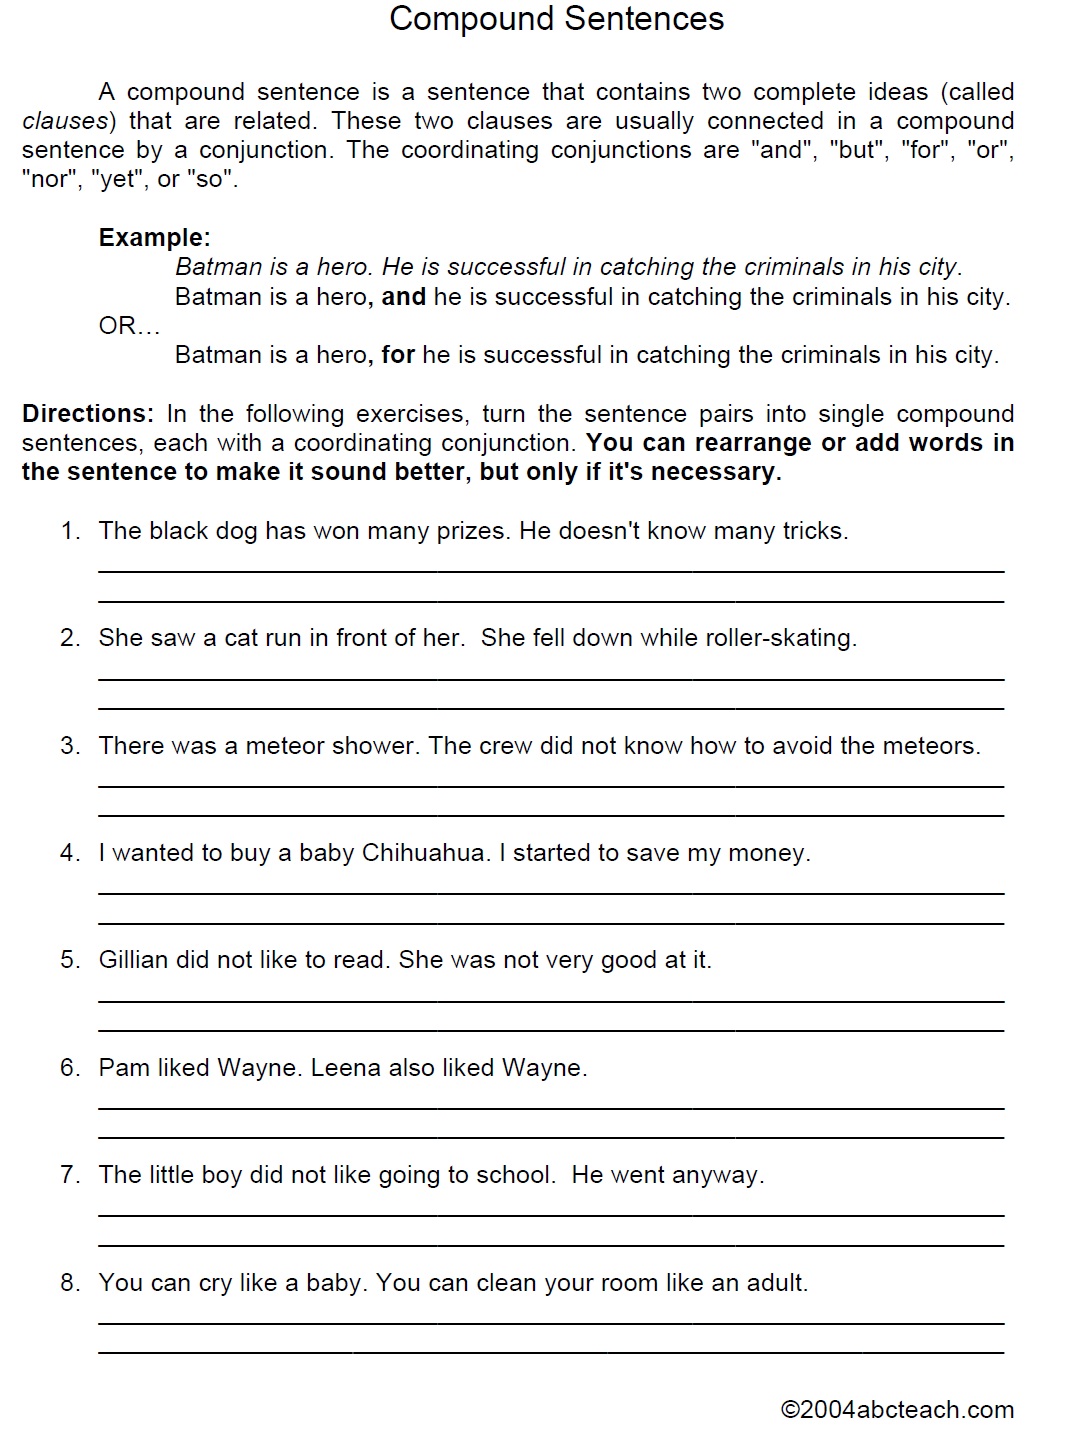 Identifying Clauses In Complex Sentences Worksheet Answers